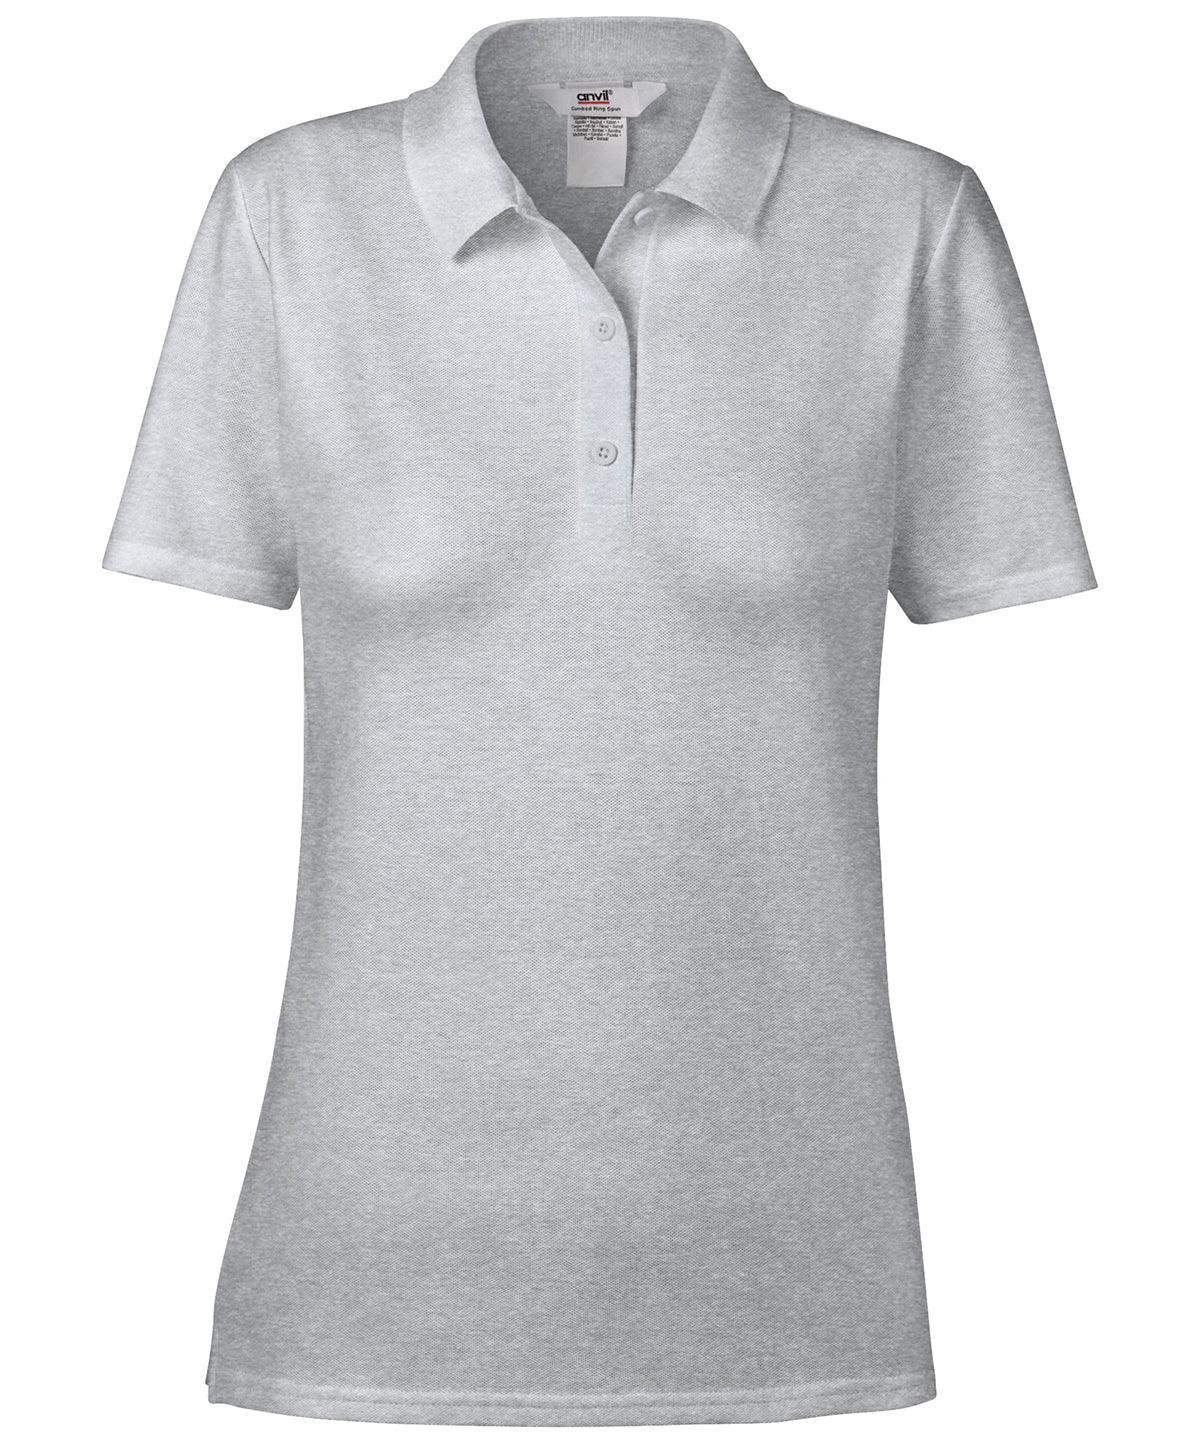 Heather Grey - Anvil women's double piqué polo Polos Last Chance to Buy Polos & Casual, Women's Fashion Schoolwear Centres